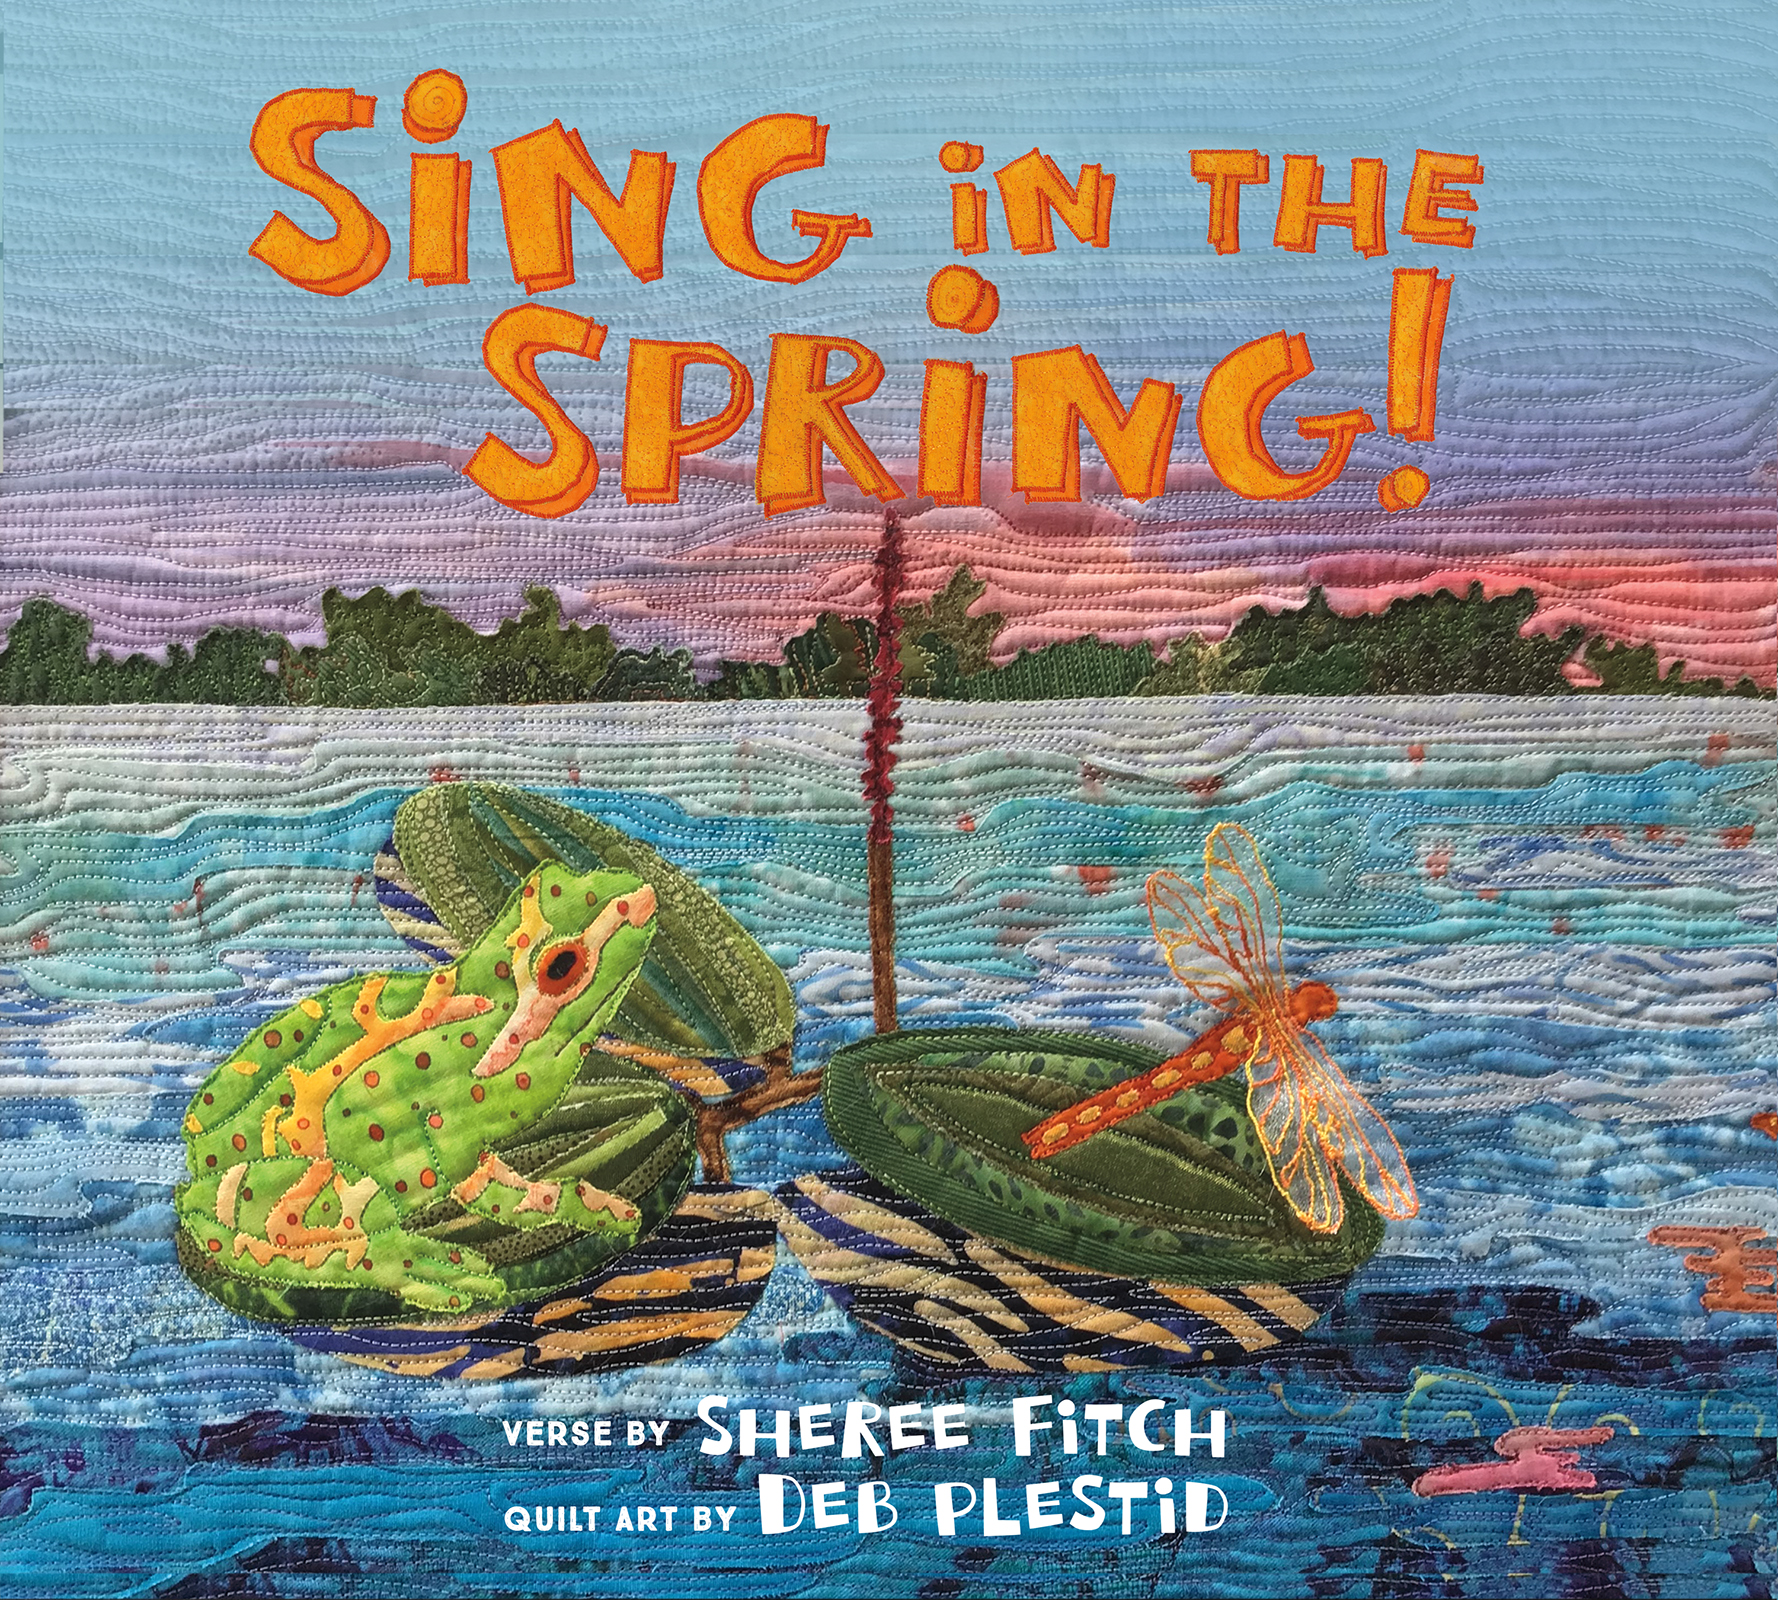 Sing in the Spring! A bestselling author teams up with an internationally renowned quilt artist